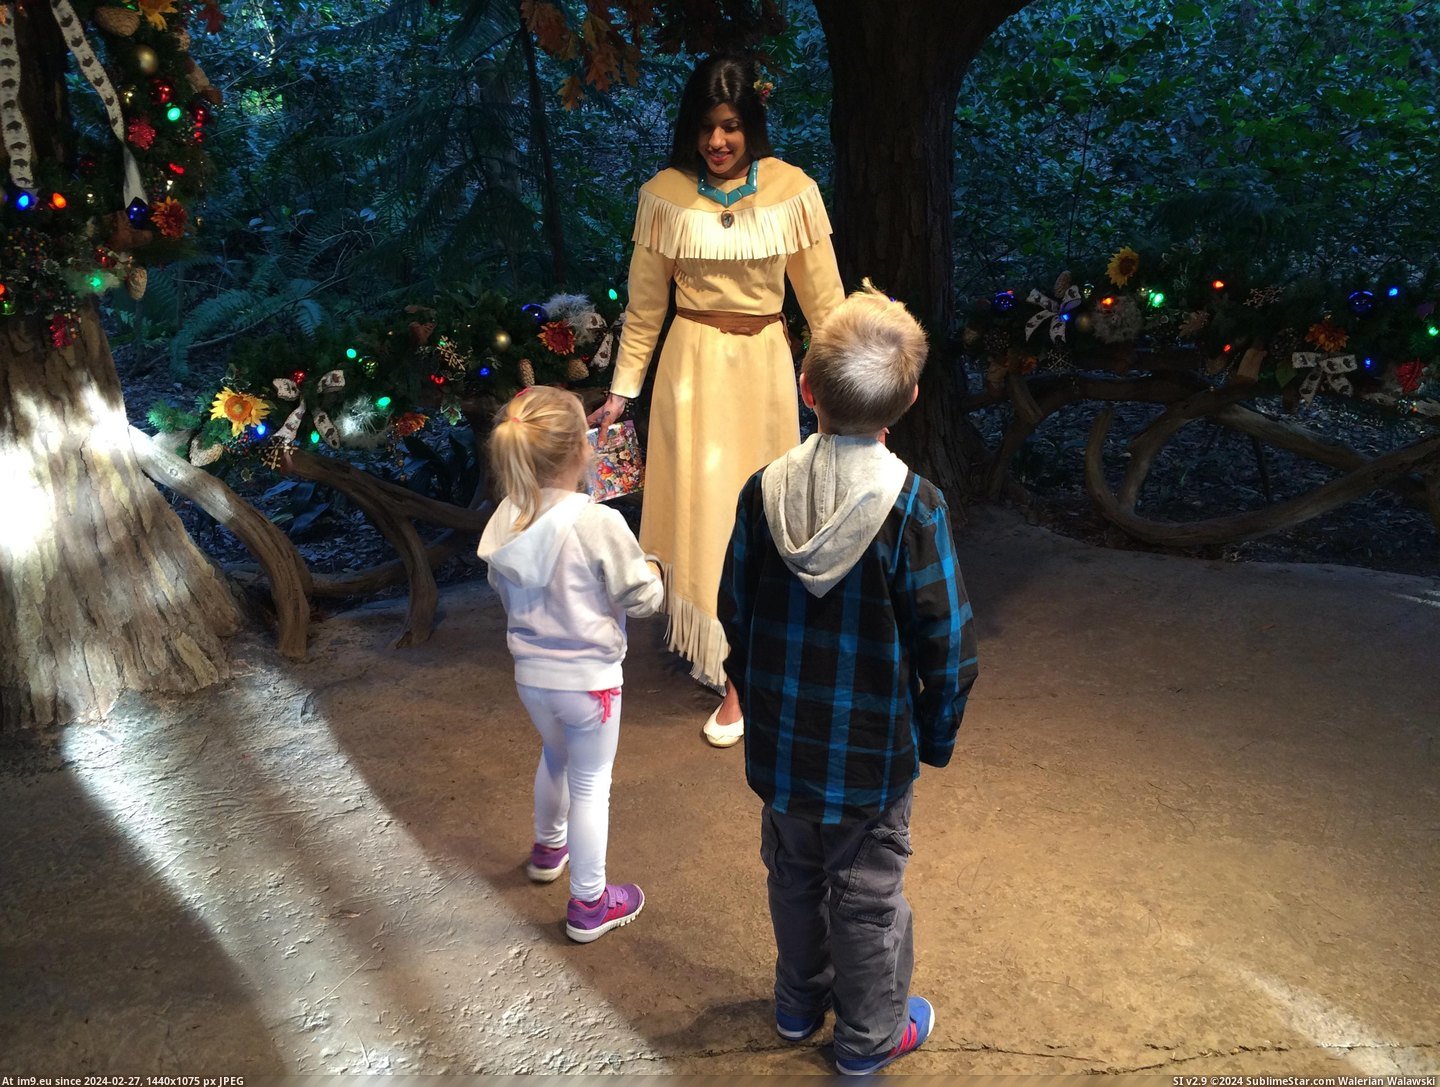 #For #Year #Old #World #Meeting #Hug #Stops #Pocahontas #Real #Son #Disney #Daughter [Pics] Meeting Pocahontas at Disney World. My daughter goes in for a hug..My 6 year old son stops and says 'The real Pocahontas  Pic. (Image of album My r/PICS favs))